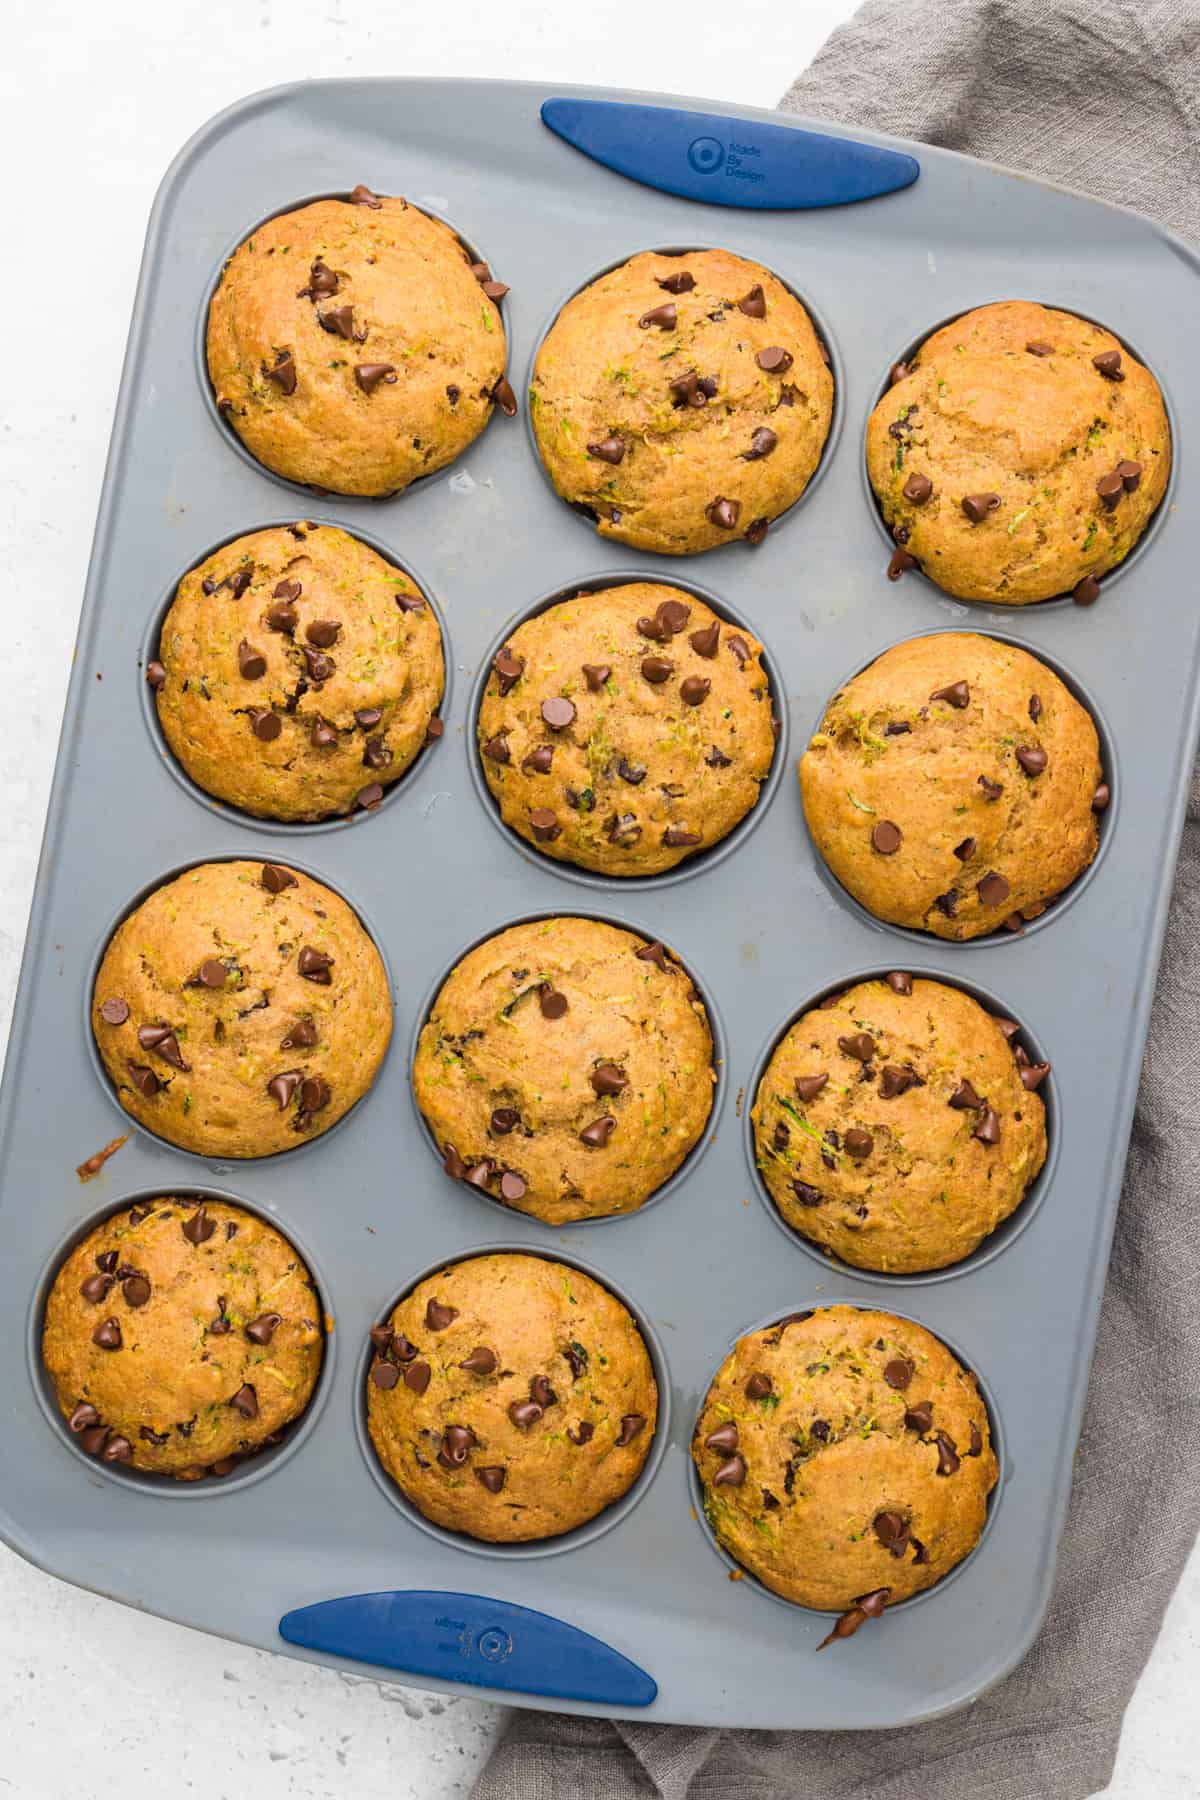 Chocolate Chip Zucchini Muffins in a muffin pan fresh from the oven.